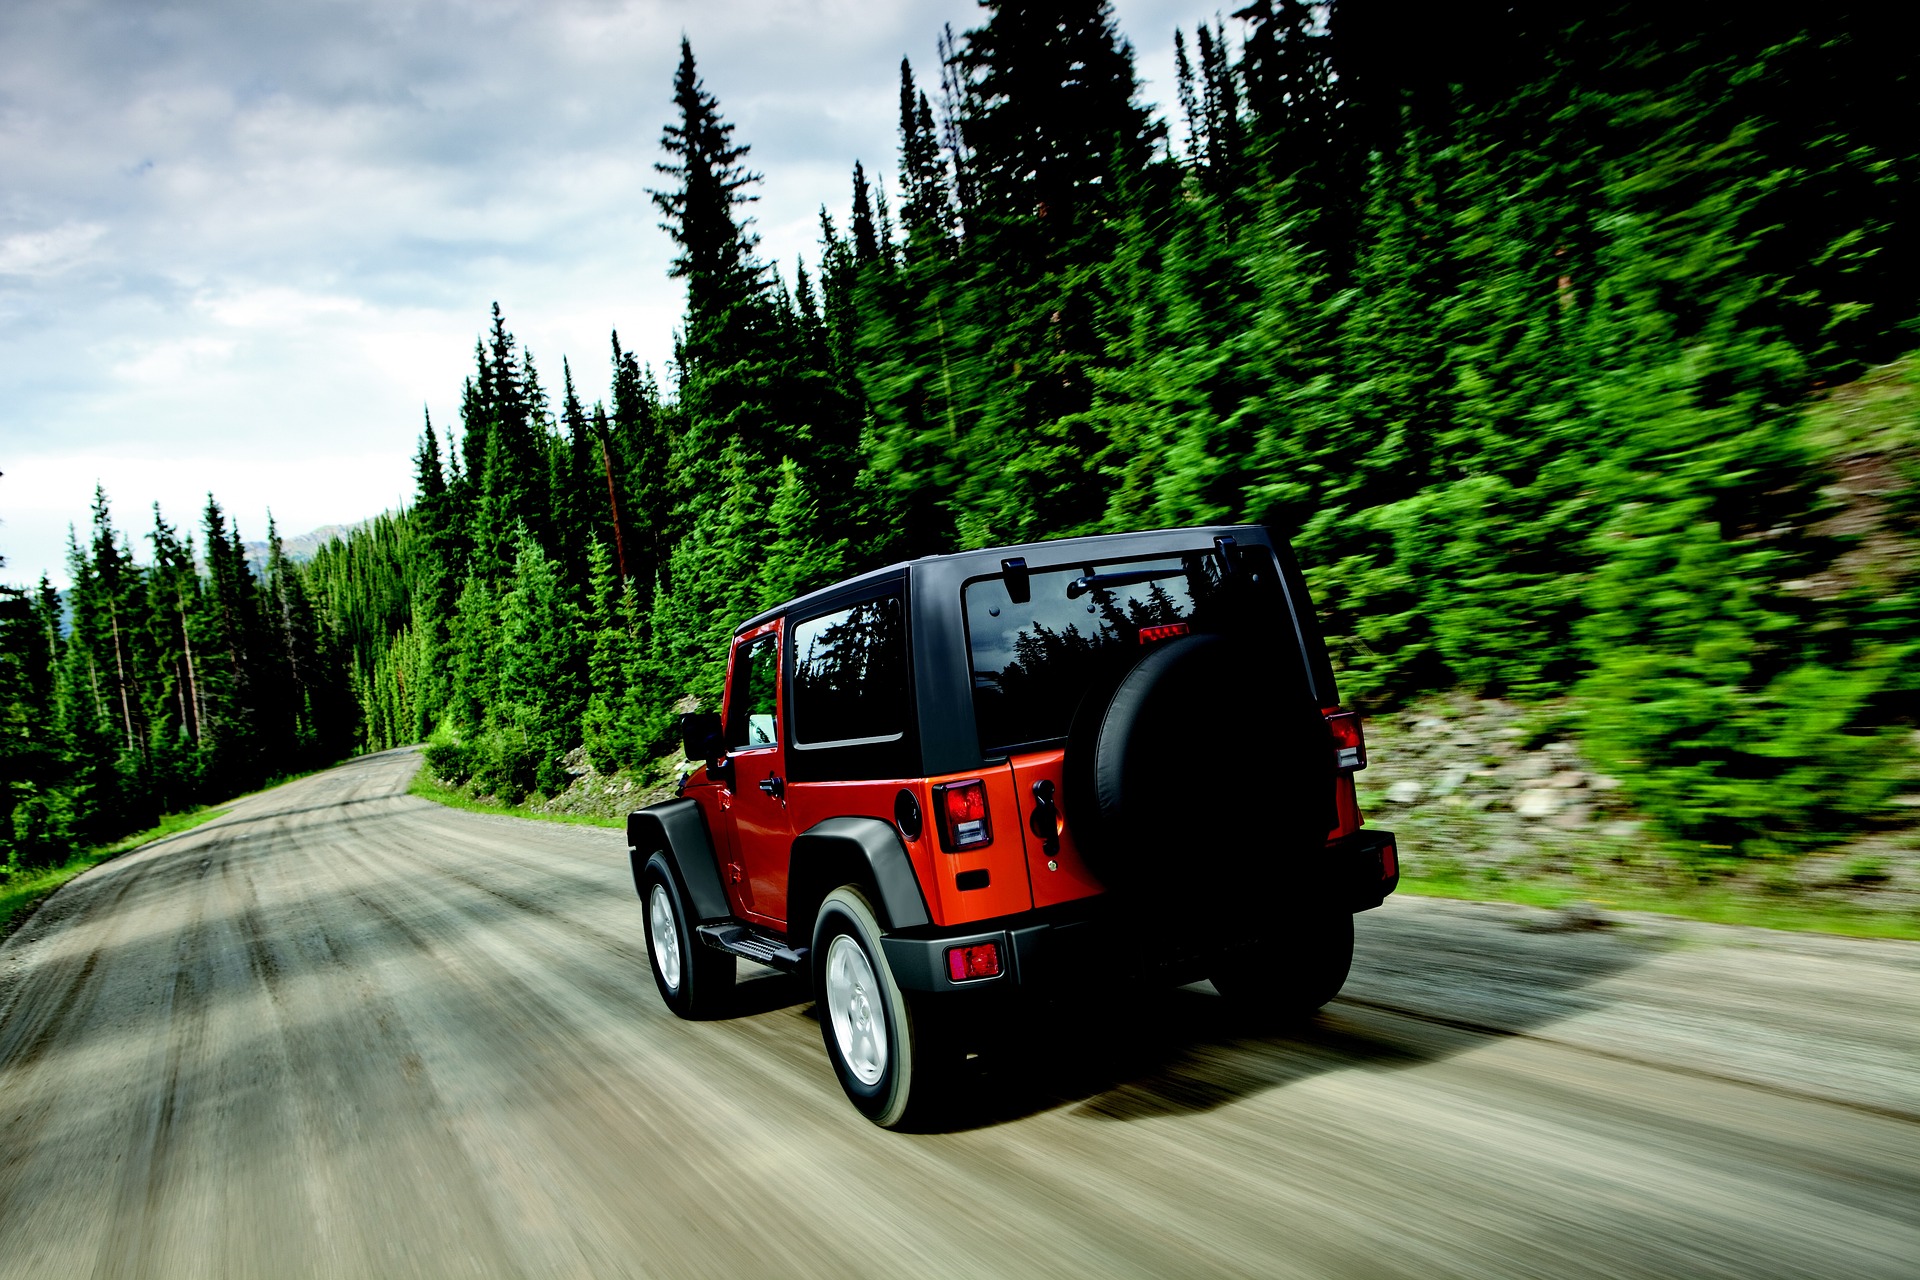 Jeep Wrangler Towing Capacity: How Much RV Can It Tow?